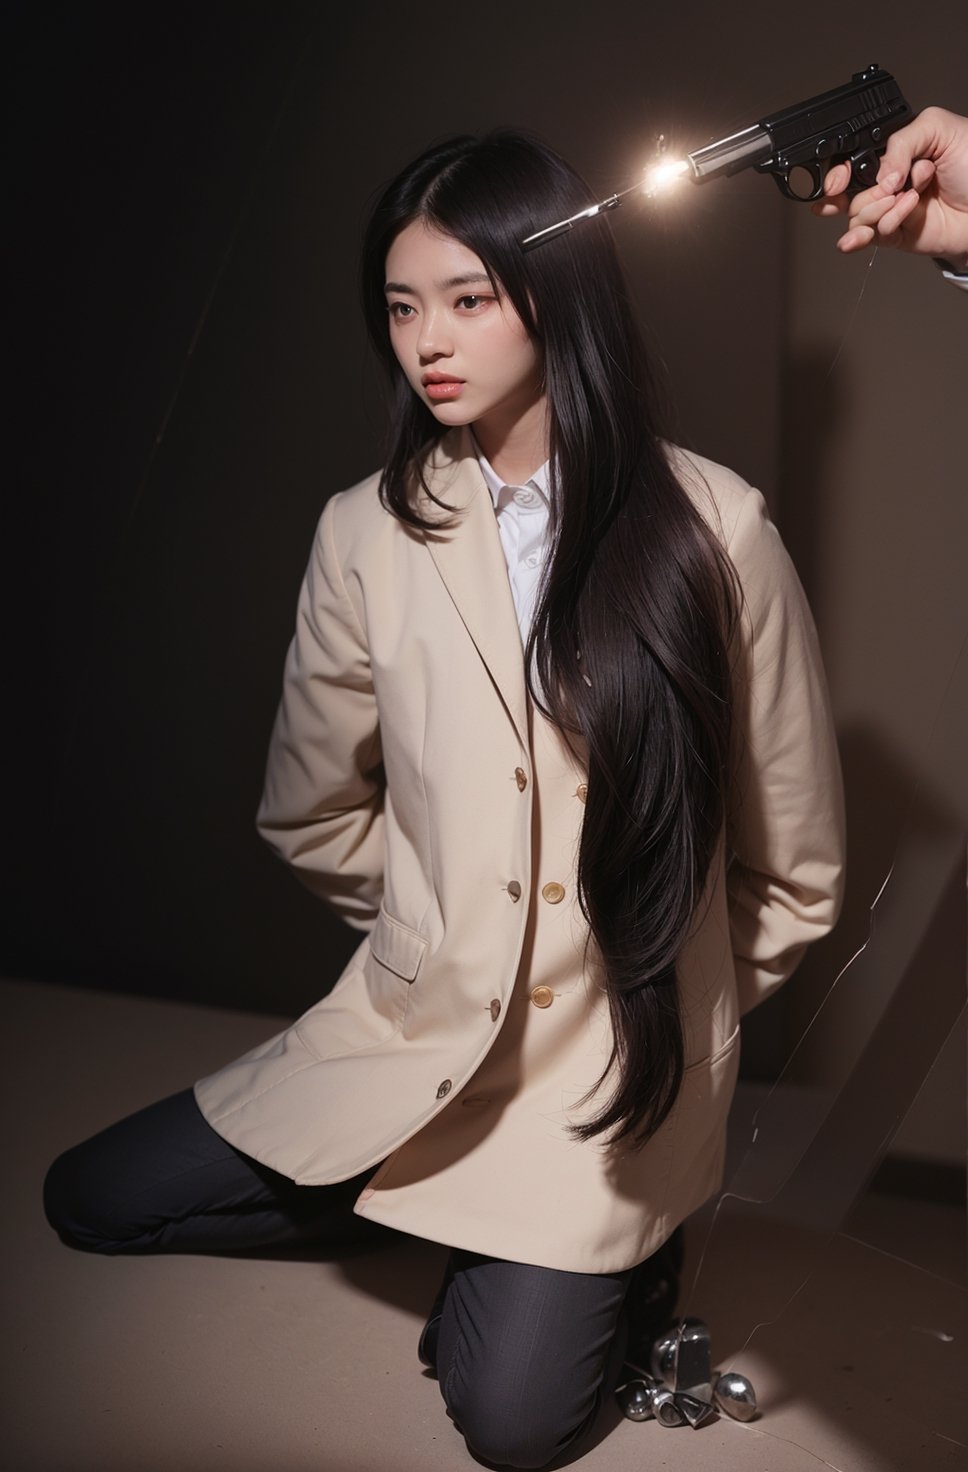 (((((Button_top_collared_blazer_suit:1.5))))),(((((kneeling:1.5))))), (((extra_long_hair_with_complete_fringes_with_blurry:1.4))),(((((medium_body_shot:1.4))))),(beautiful and aesthetic:1.4),((((round cheeks, high-bridged nose, plastic surgery round eyes:1.5)))),(((((dark_tiny_prison_cell:1.4))))),((((another_man_holding_pistol,firing,bullet:1.5)))),
perfect.,Bomi,Enhance,Model ,Asian ,eungirl,((((1girl)))).,((Perfect lips)).,perfect light